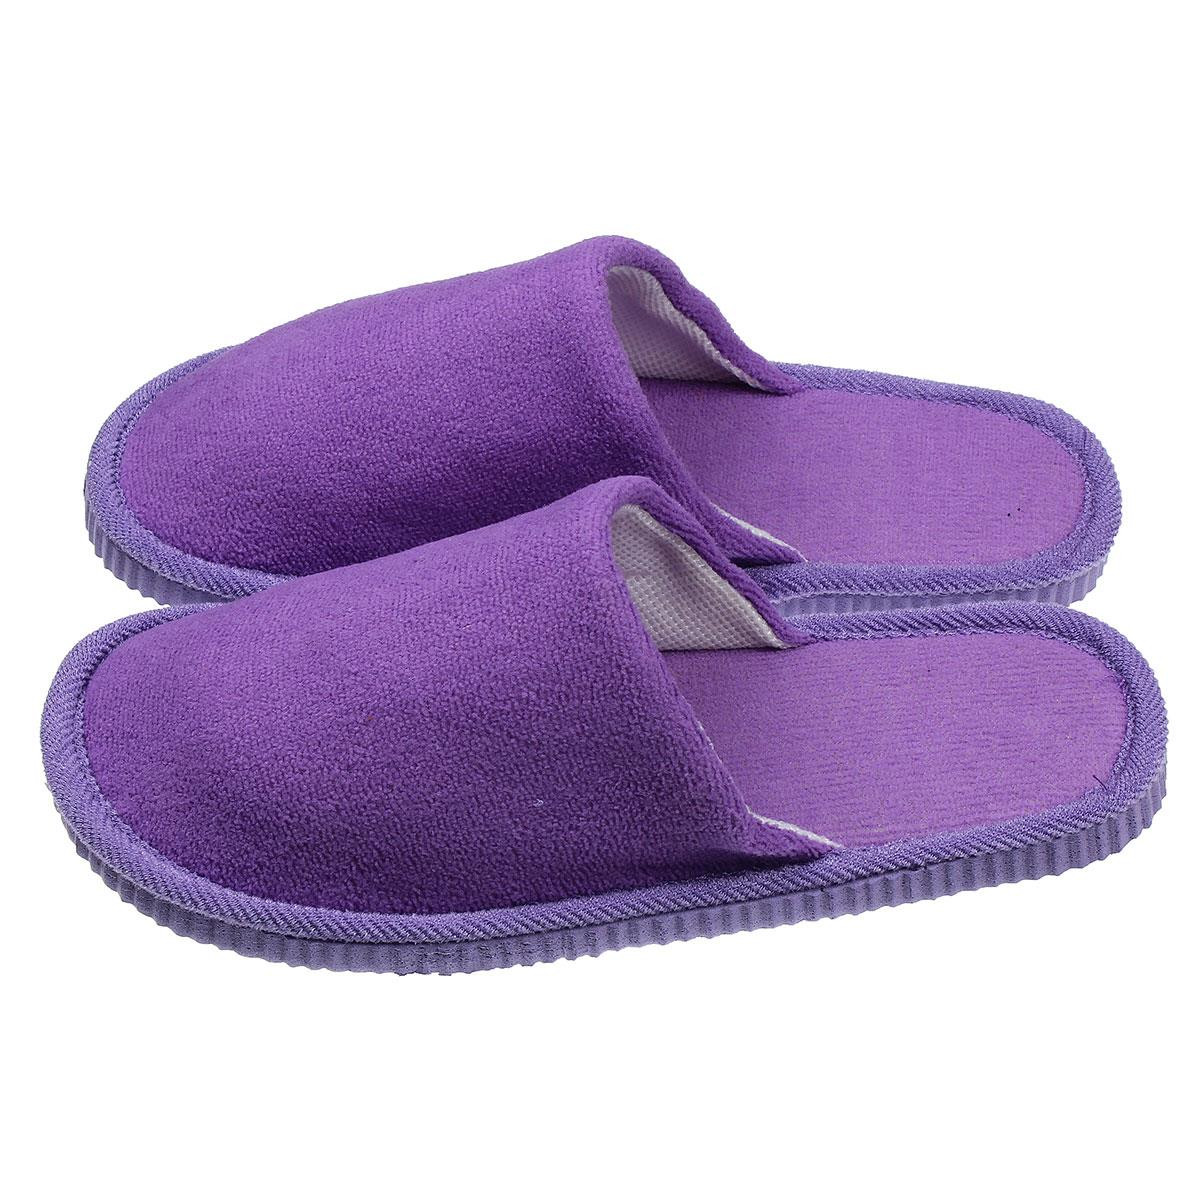 Bedroom Shoes For Womens
 Womens Bedroom Slippers Reviews line Shopping Womens